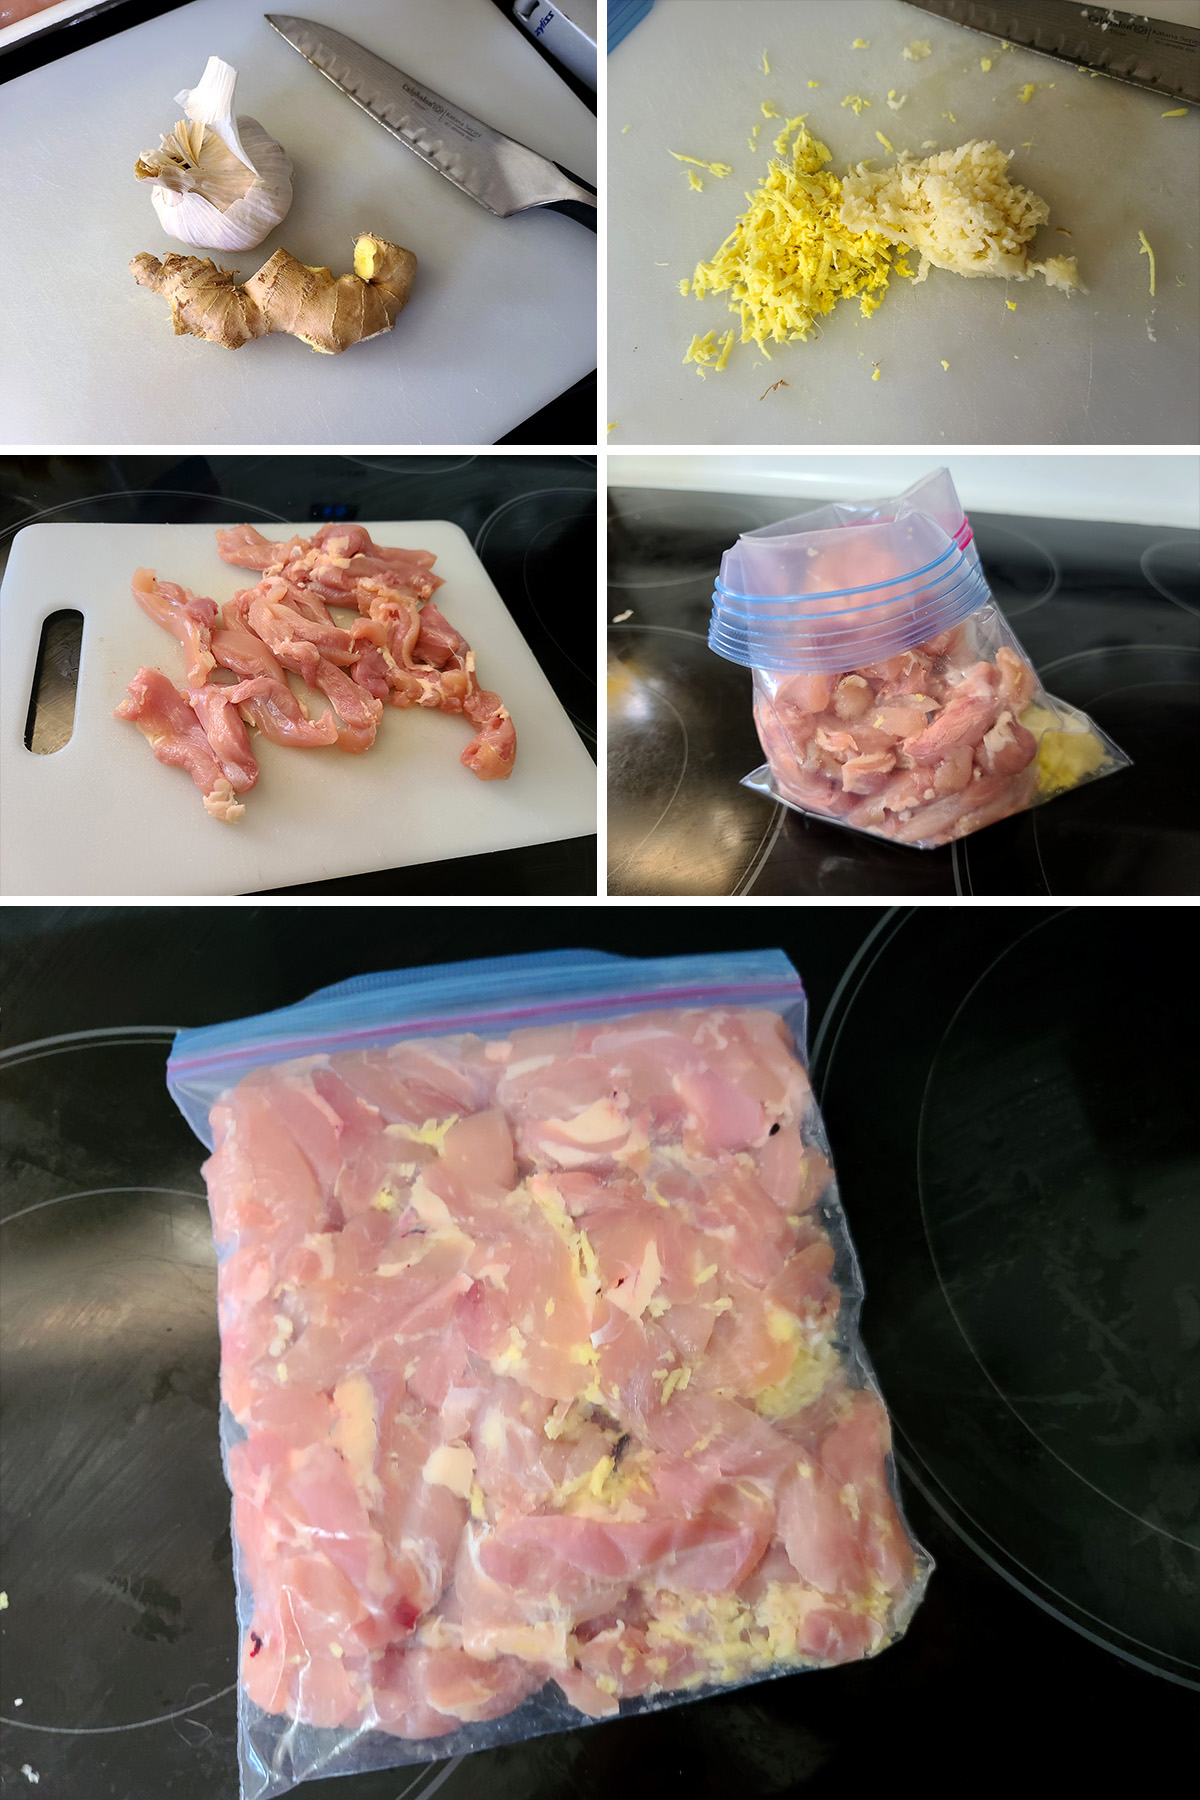 A 5 part image showing the ginger and garlic being prepared, the chicken slices, and everything combined in a baggie.